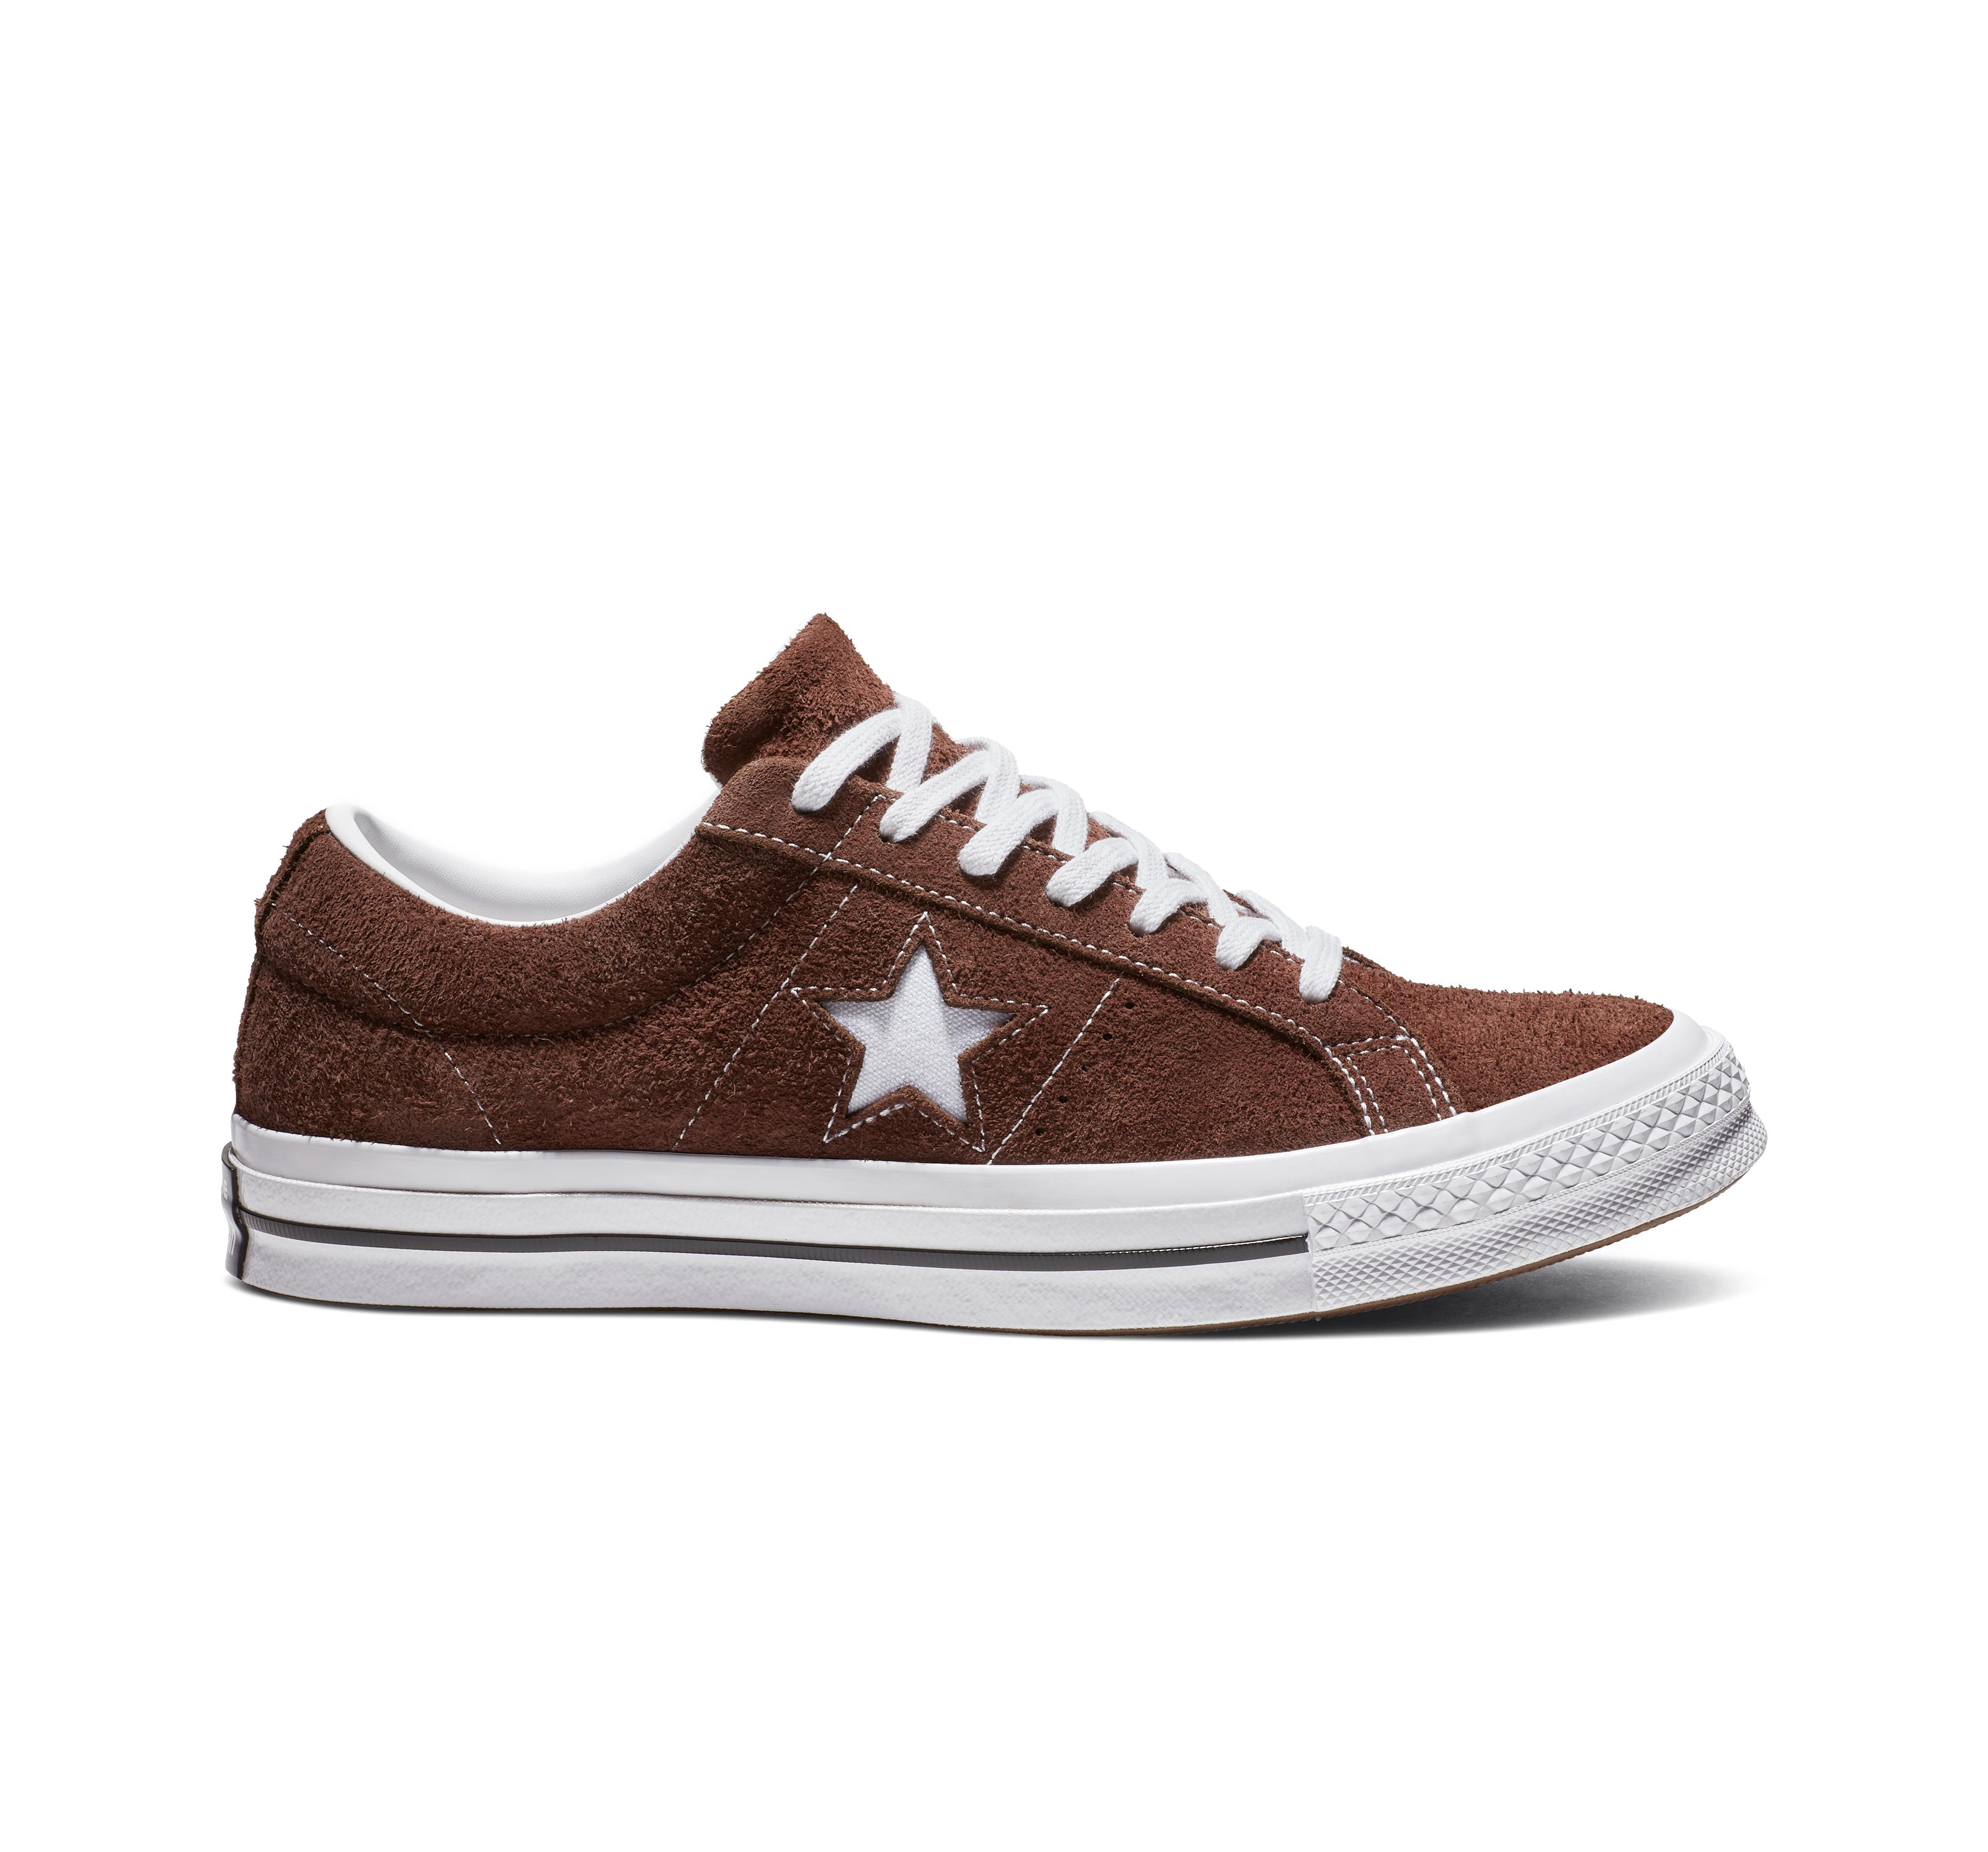 Converse One Star Vintage Suede Low Top in Brown for Men - Lyst